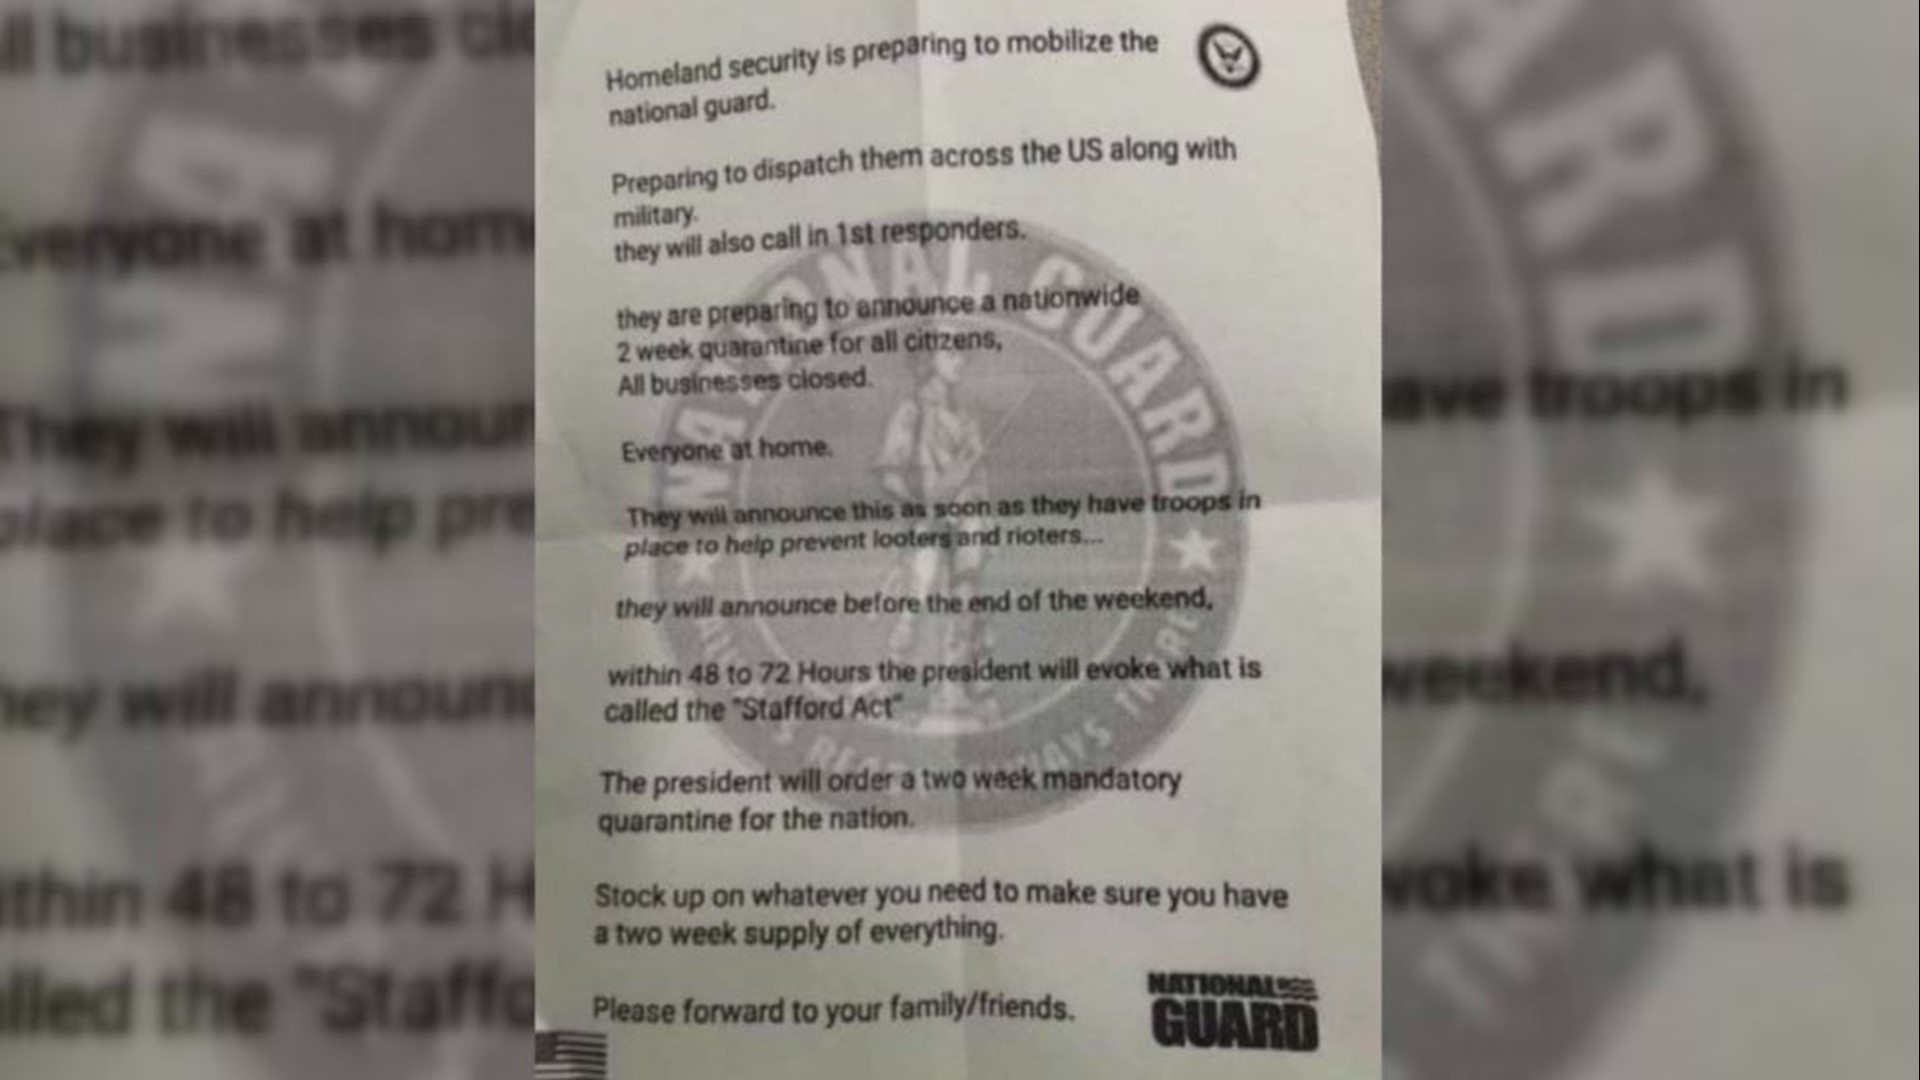 Georgia National Guard tweeted that it was not true back in April, and it's still not true now